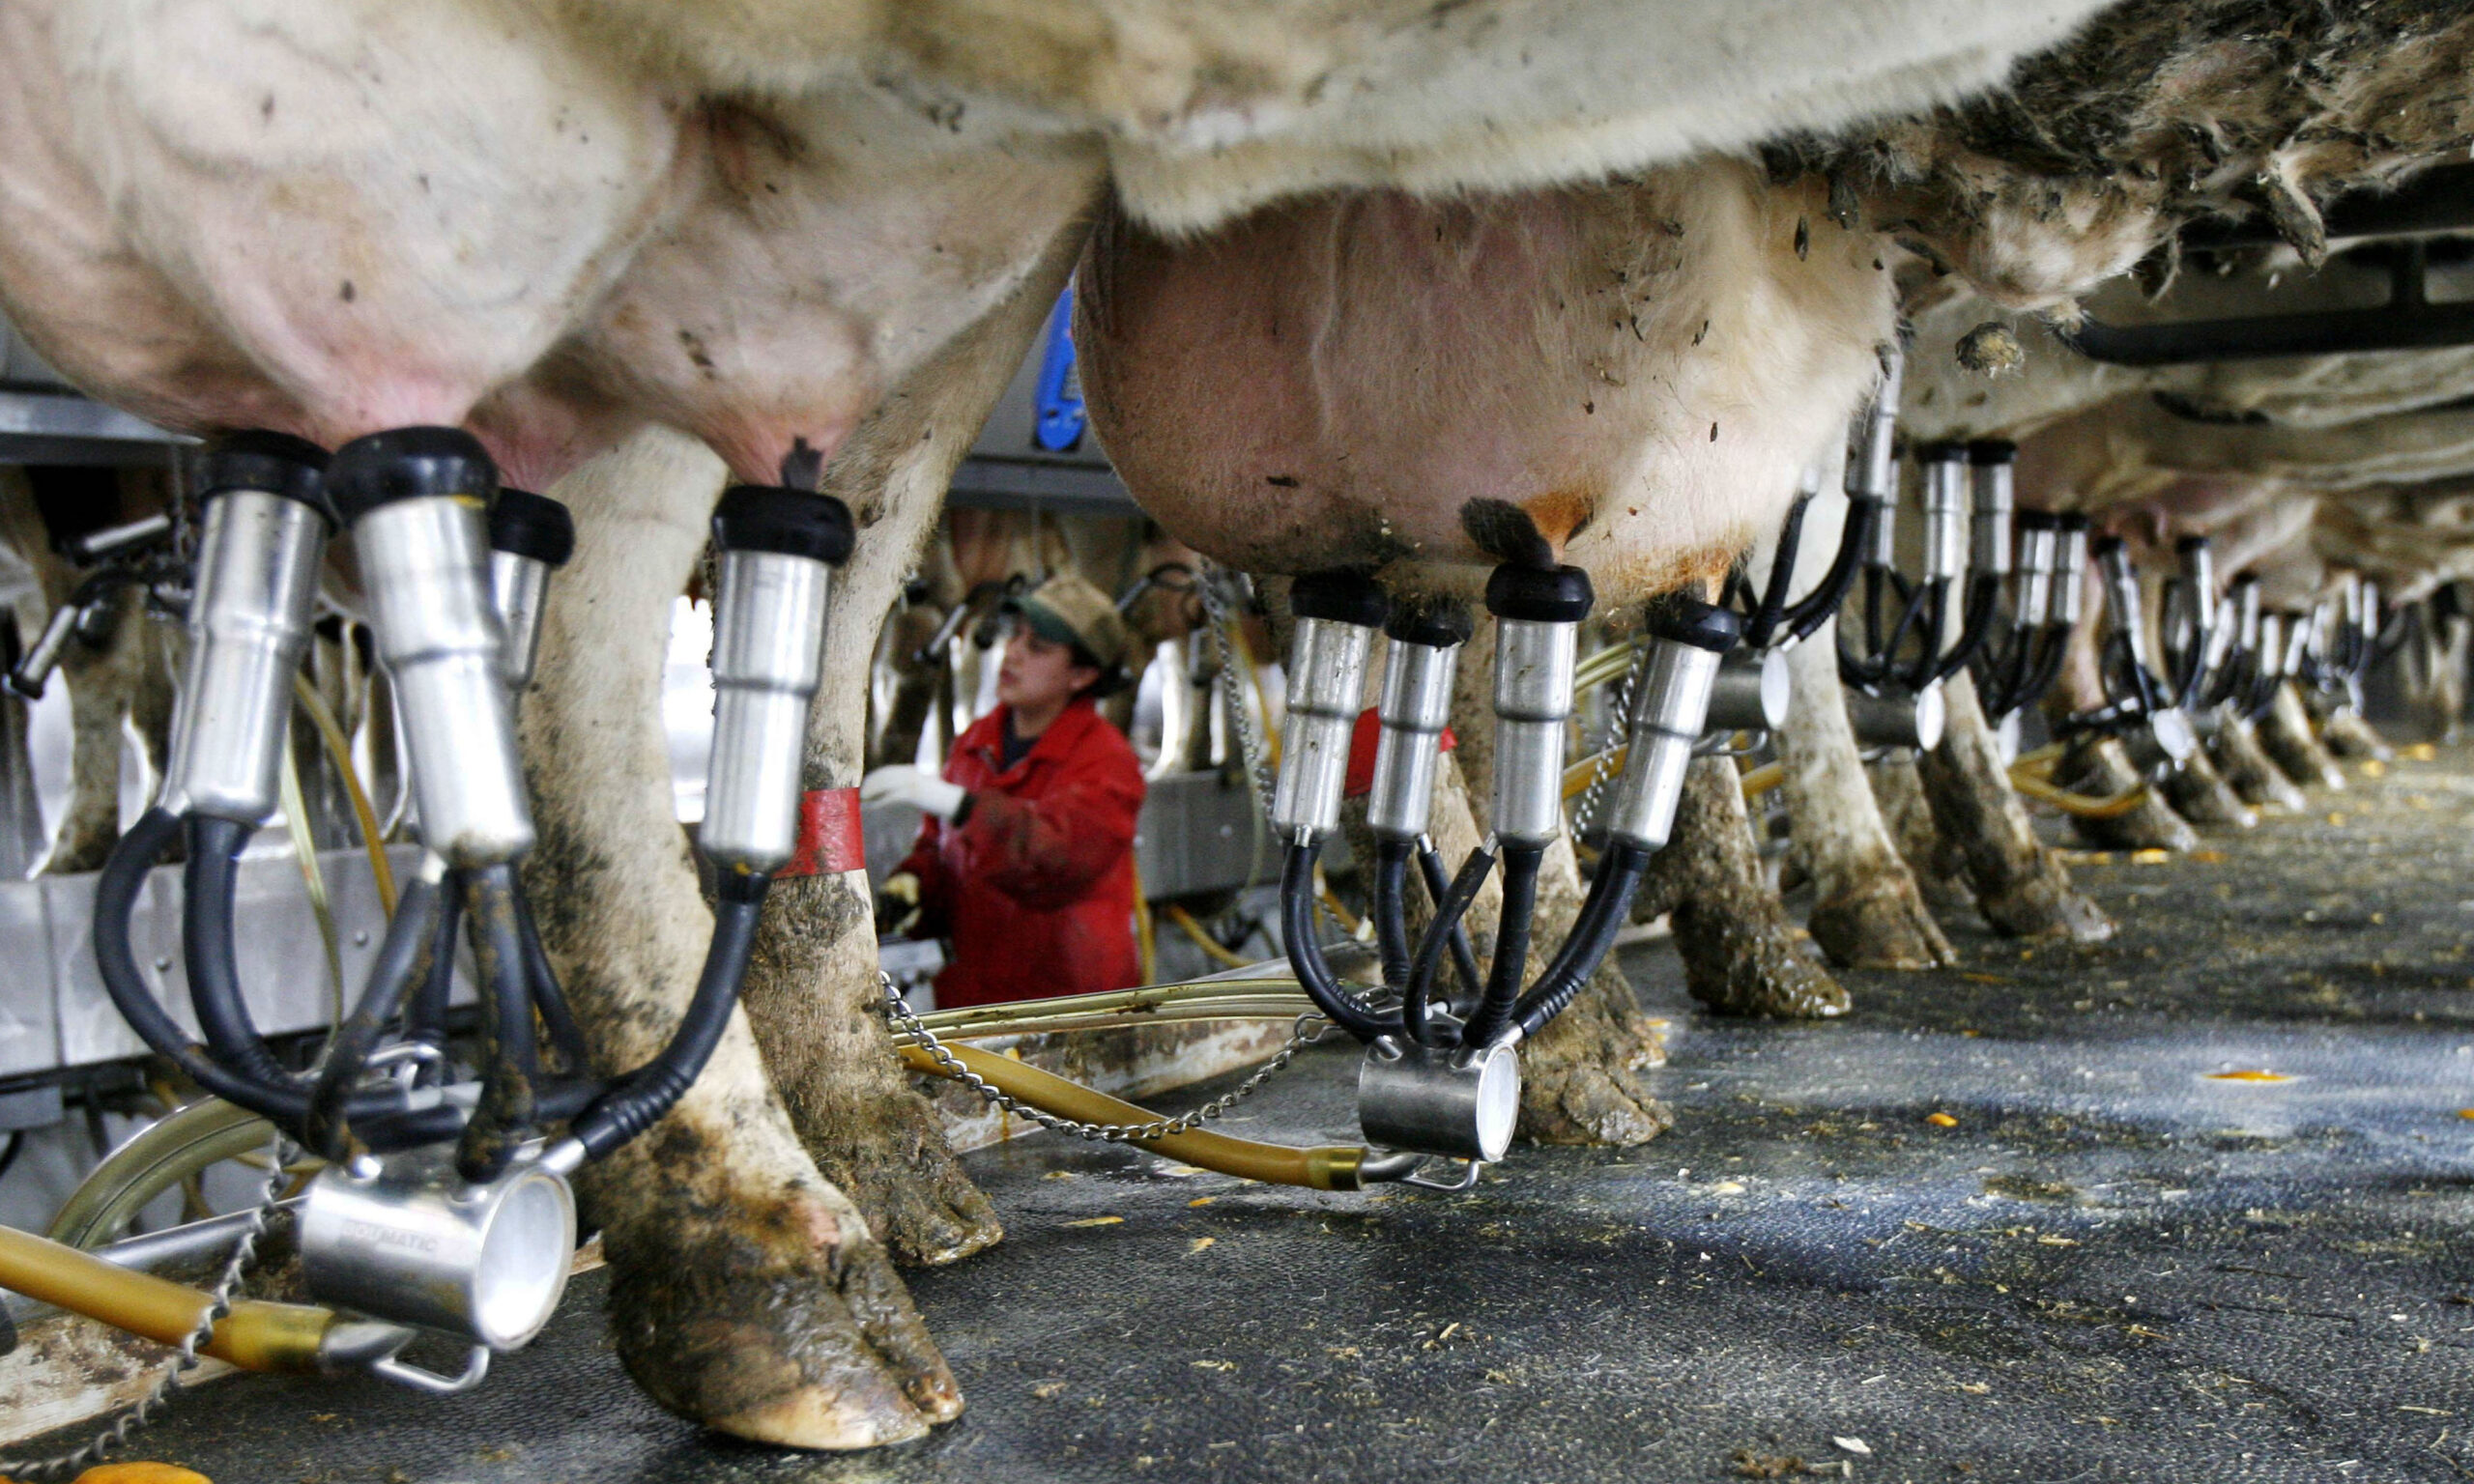 ‘More than just a job’: Wisconsin dairy industry focused on workforce amid state’s labor shortage